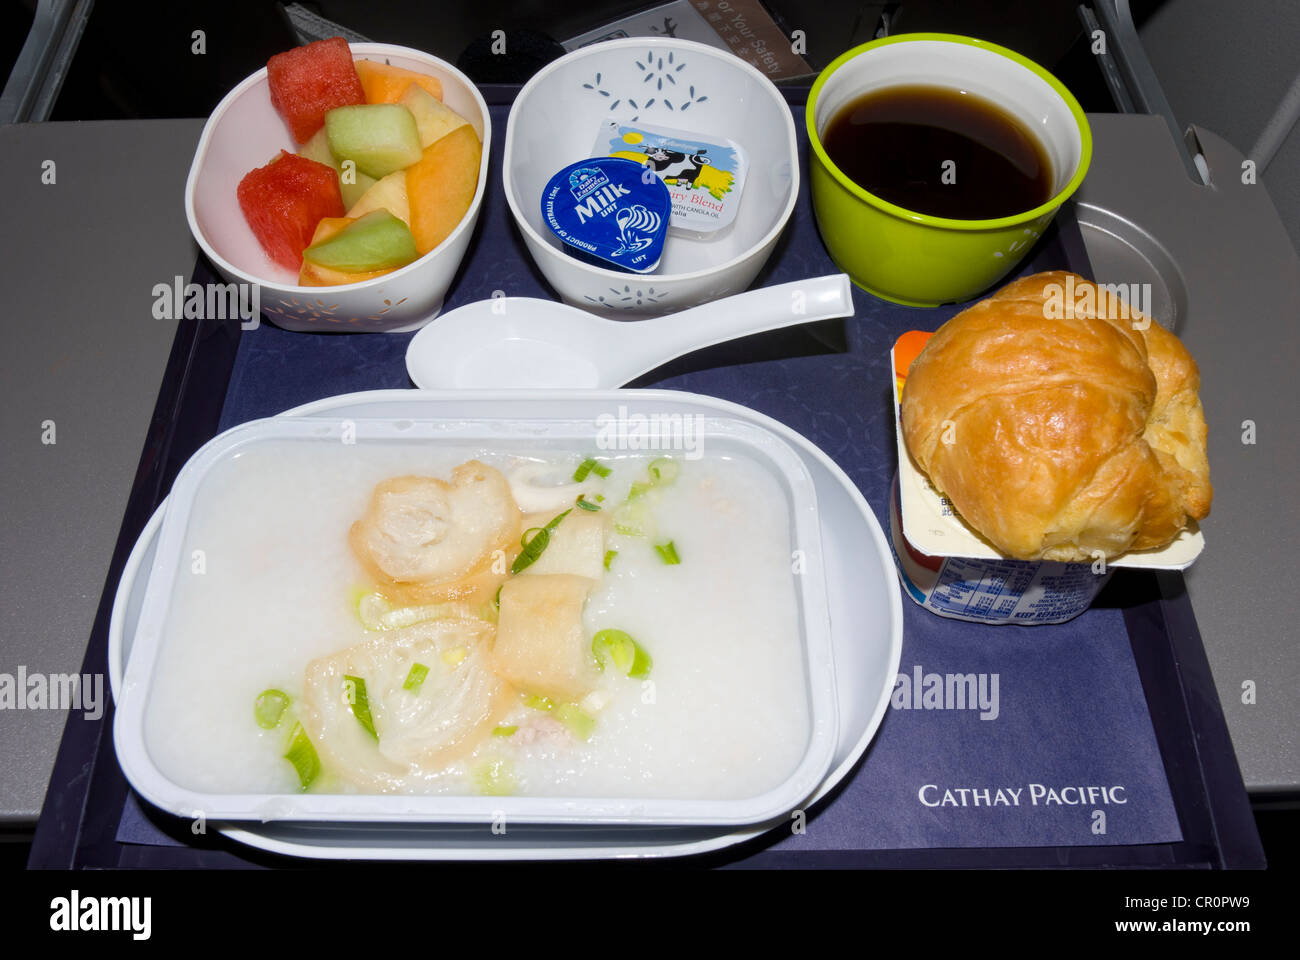 In flight meal with Cathay Pacific airline: food includes a croissant, fish in butter sauce, fruit salad and a cup of coffee Stock Photo